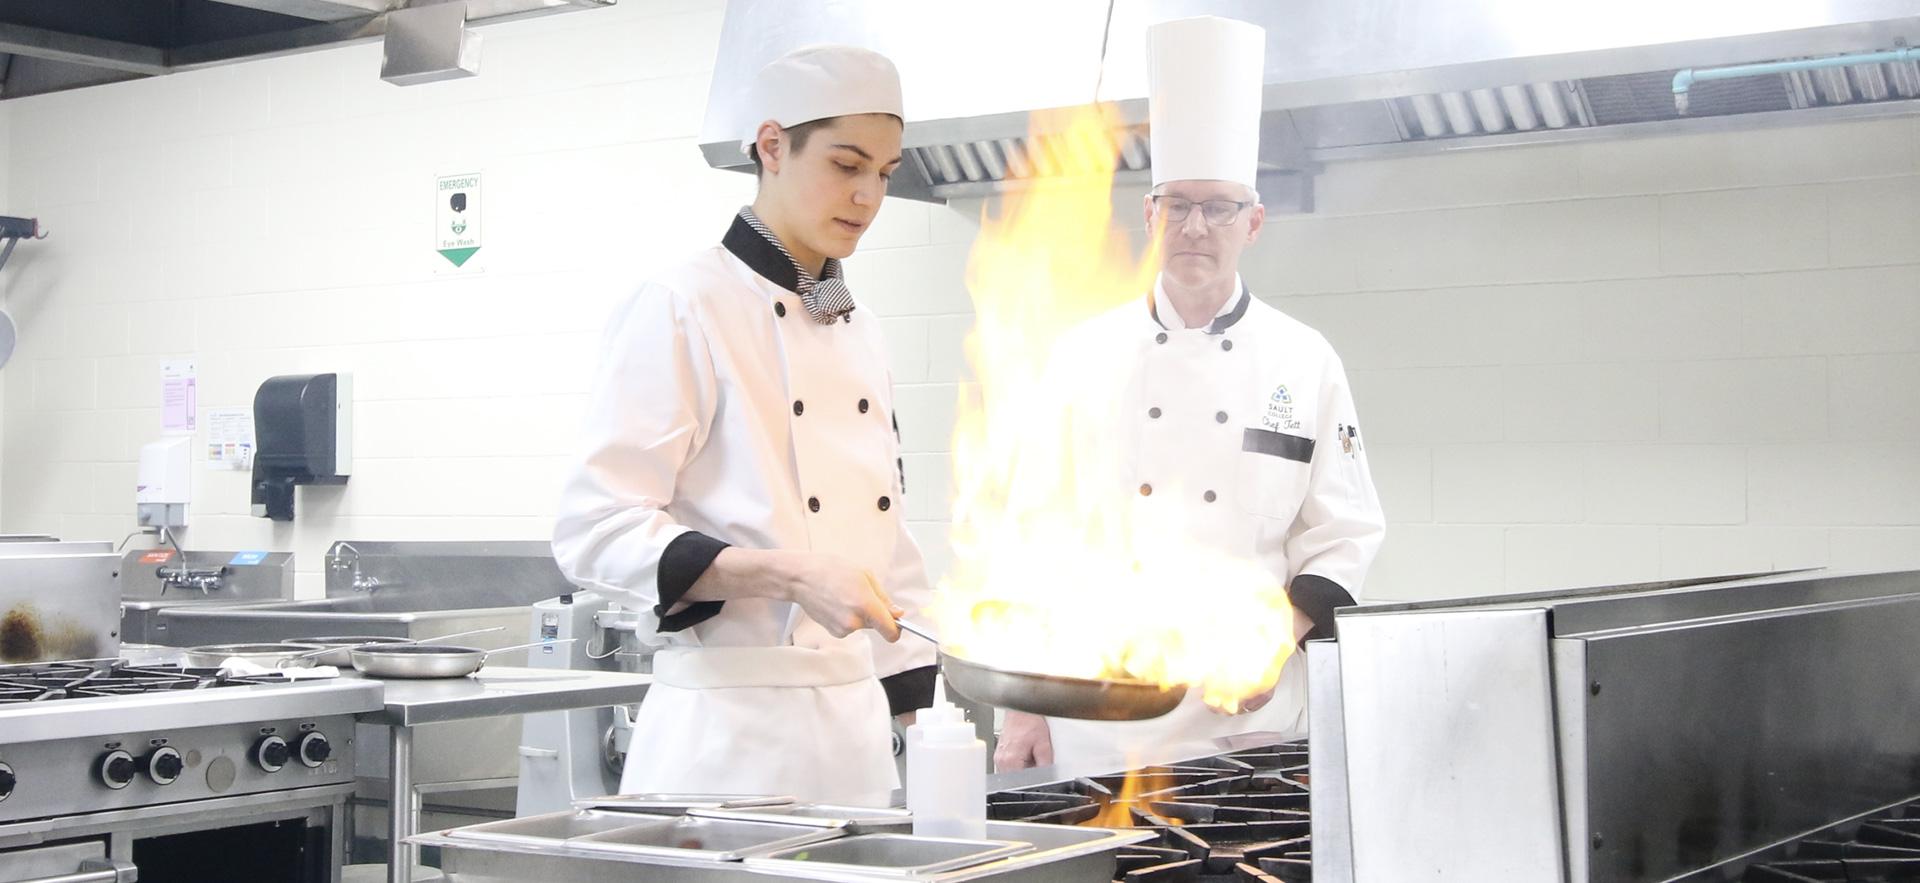 Two men in chef coats and hats in a professional kitchen with one with a pan and flambe in hand and the other overseeing